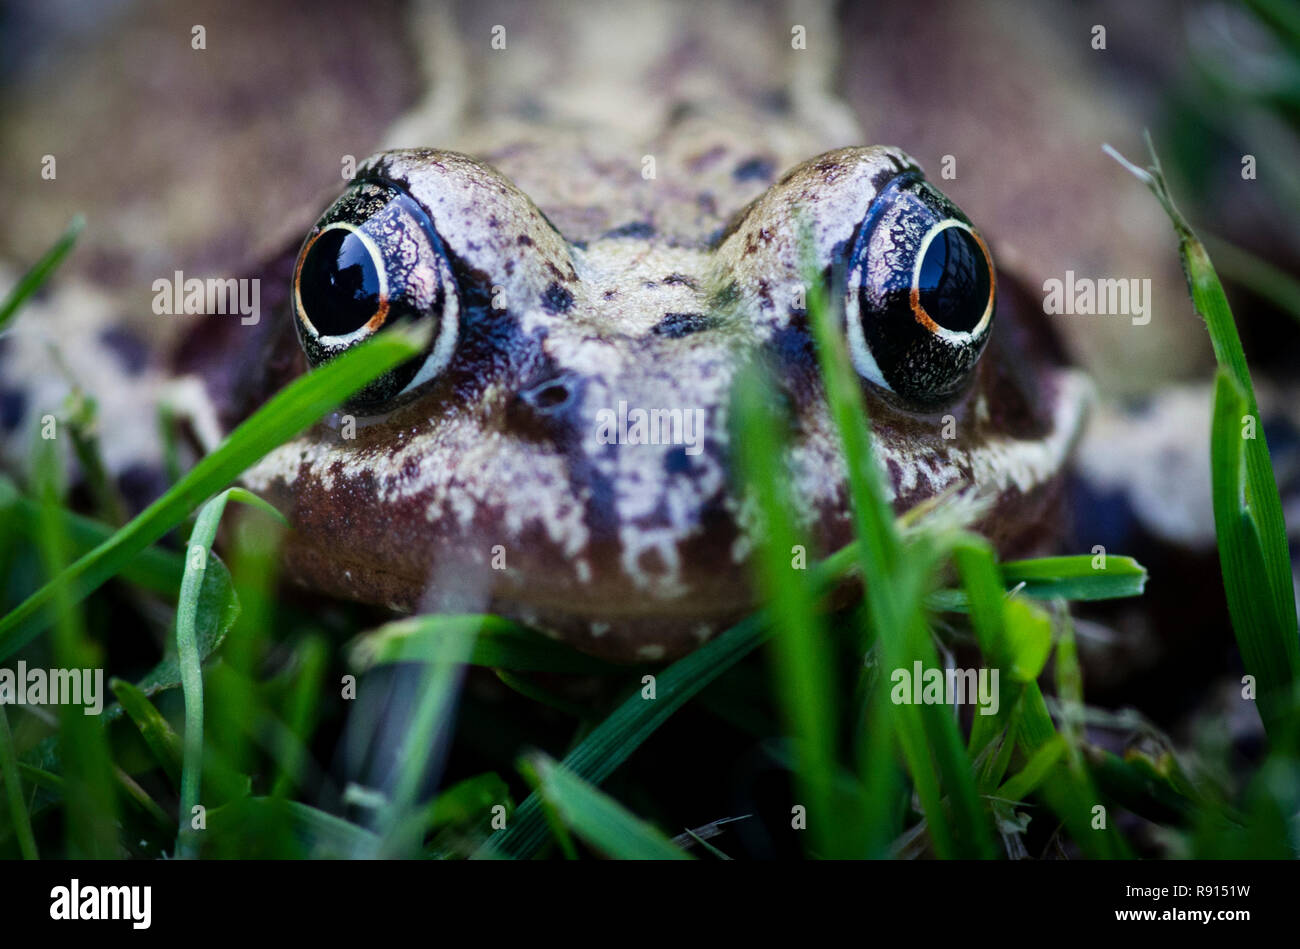 A common frog in a UK garden Stock Photo